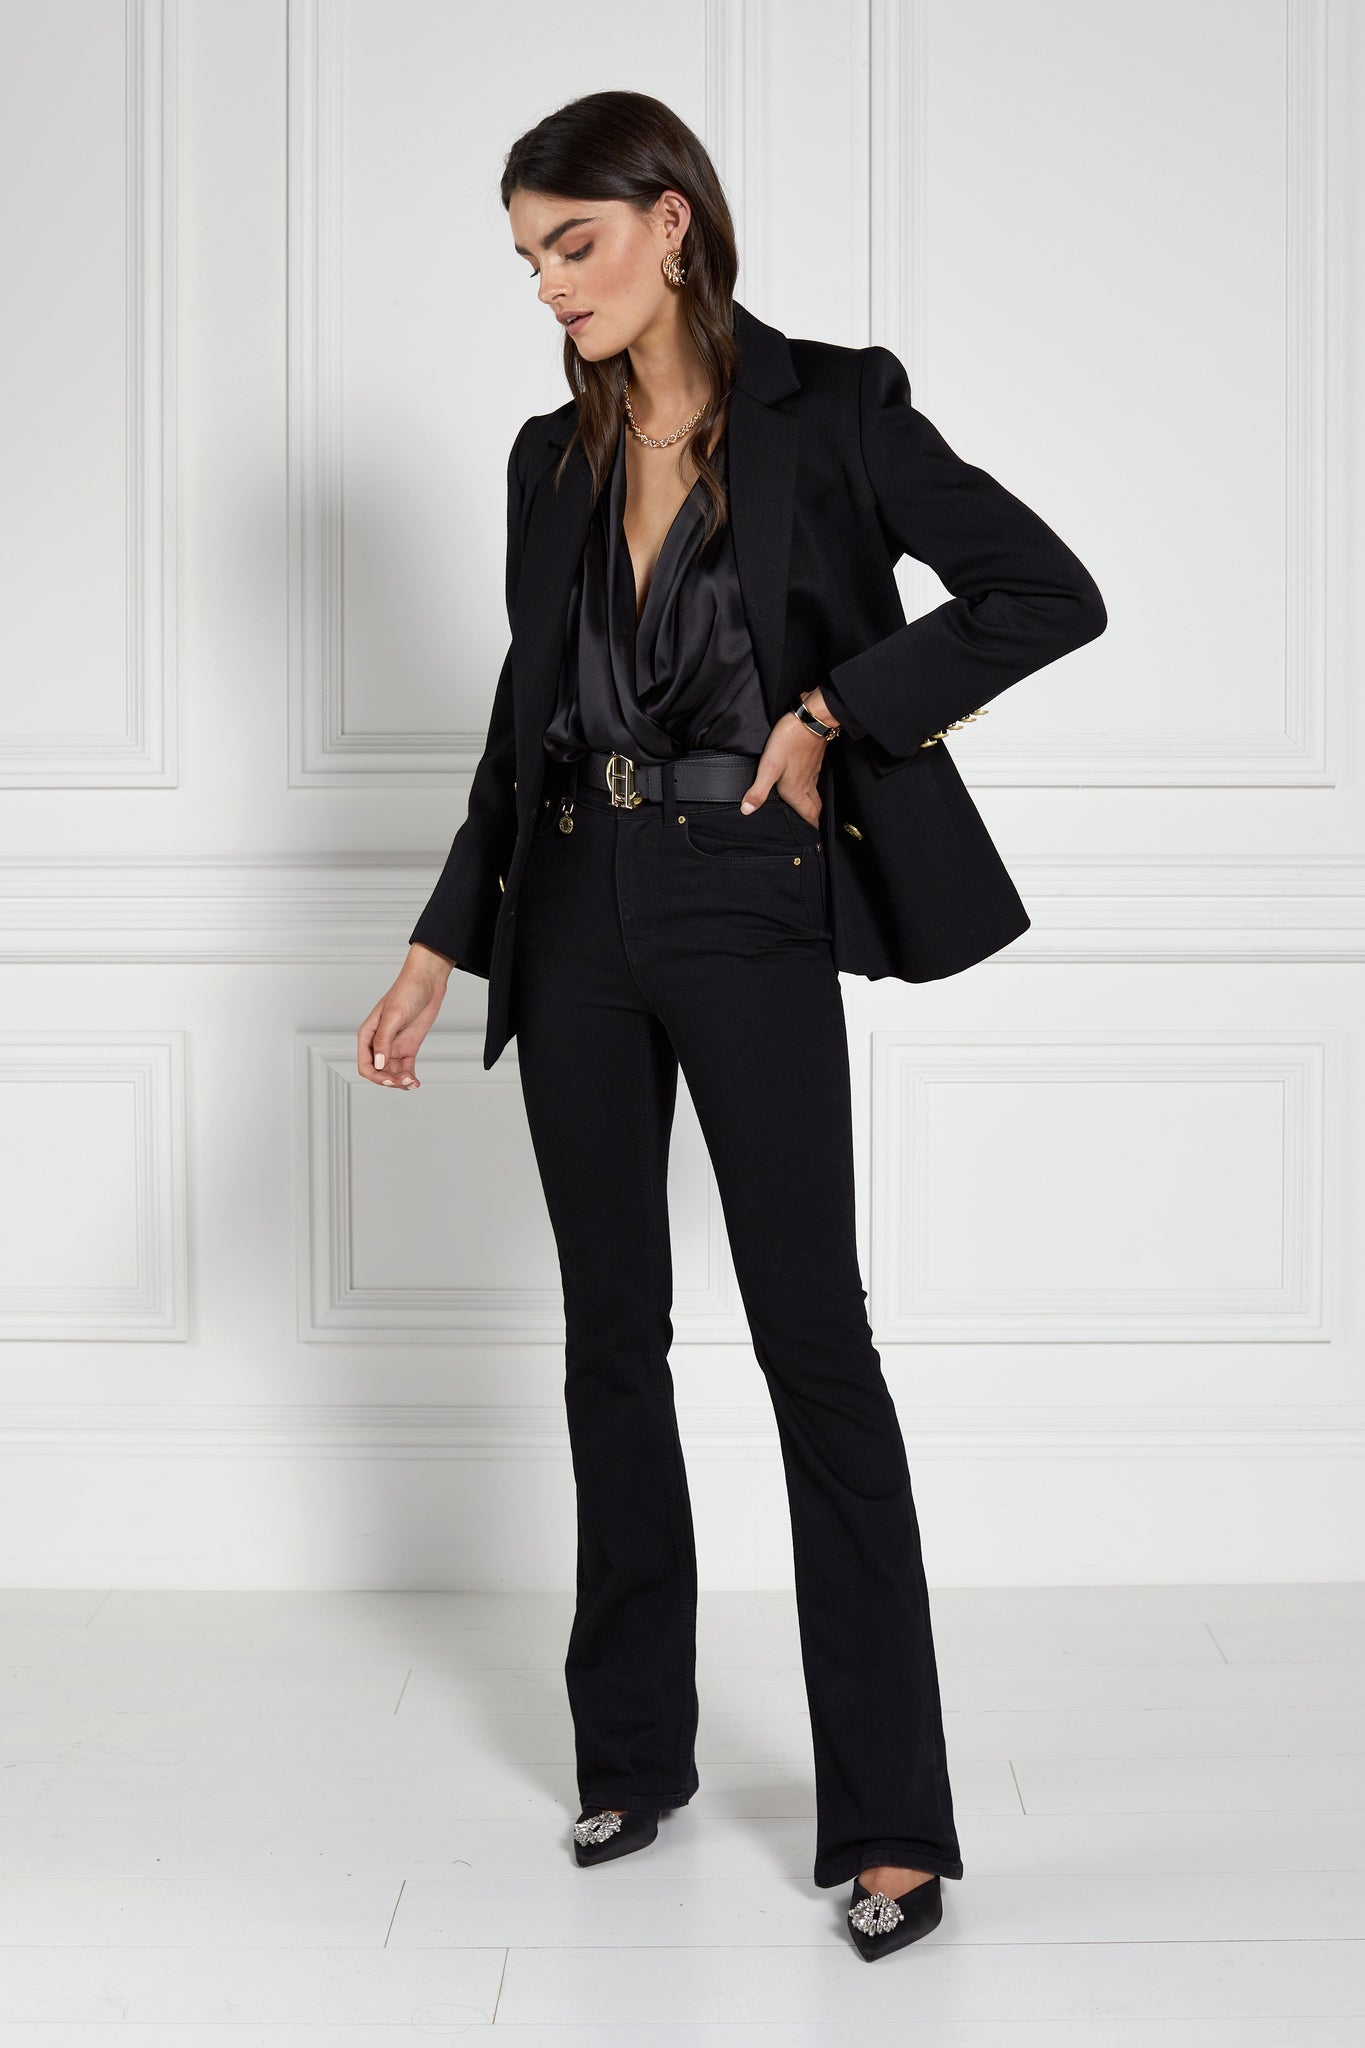 double breasted wool blazer in black with two hip pockets and gold button details down front and on cuffs and handmade in the uk worn with black silk shirt and black flared jeans 